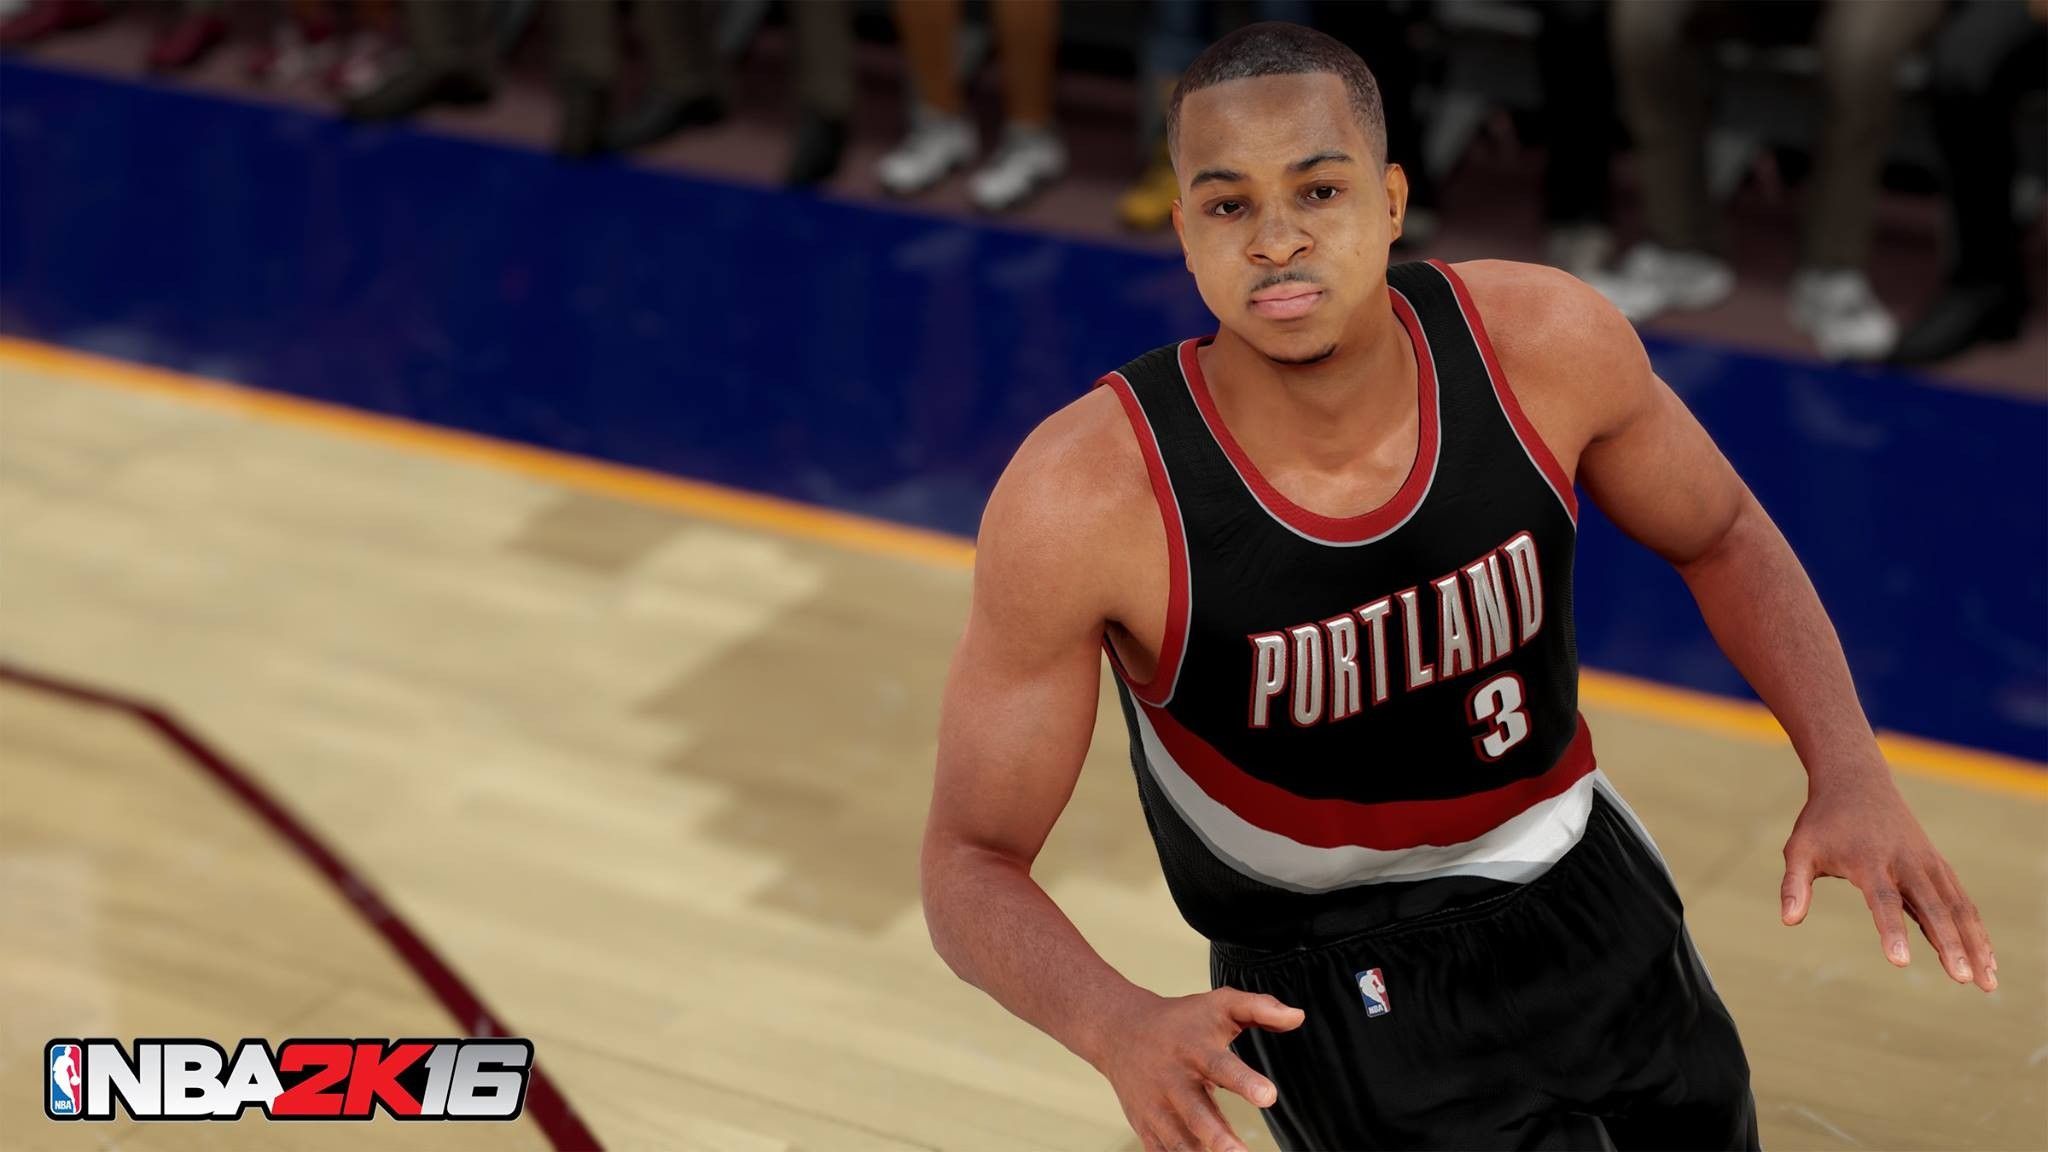 Report: NBA 2K16 Will Be a 'Spike Lee Joint